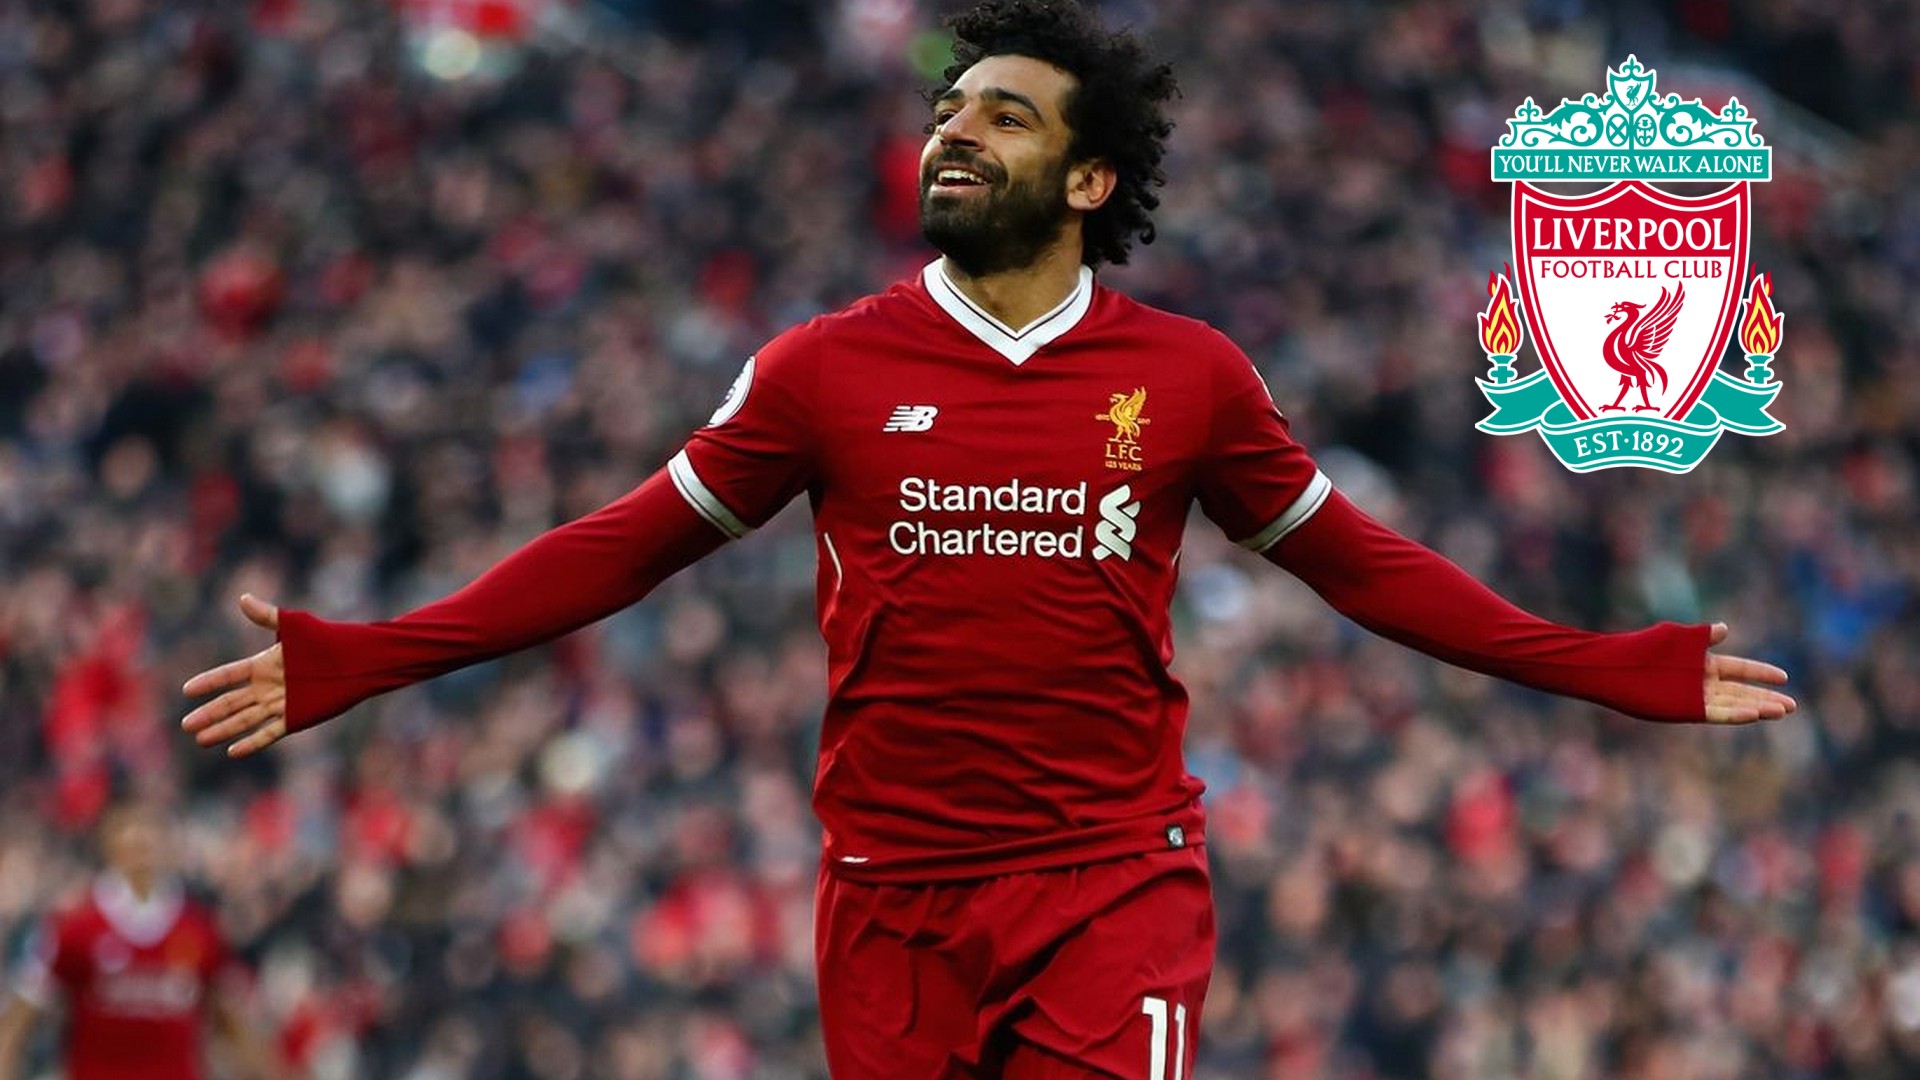 Wallpaper Mohamed Salah Liverpool HD with image resolution 1920x1080 pixel. You can make this wallpaper for your Desktop Computer Backgrounds, Mac Wallpapers, Android Lock screen or iPhone Screensavers